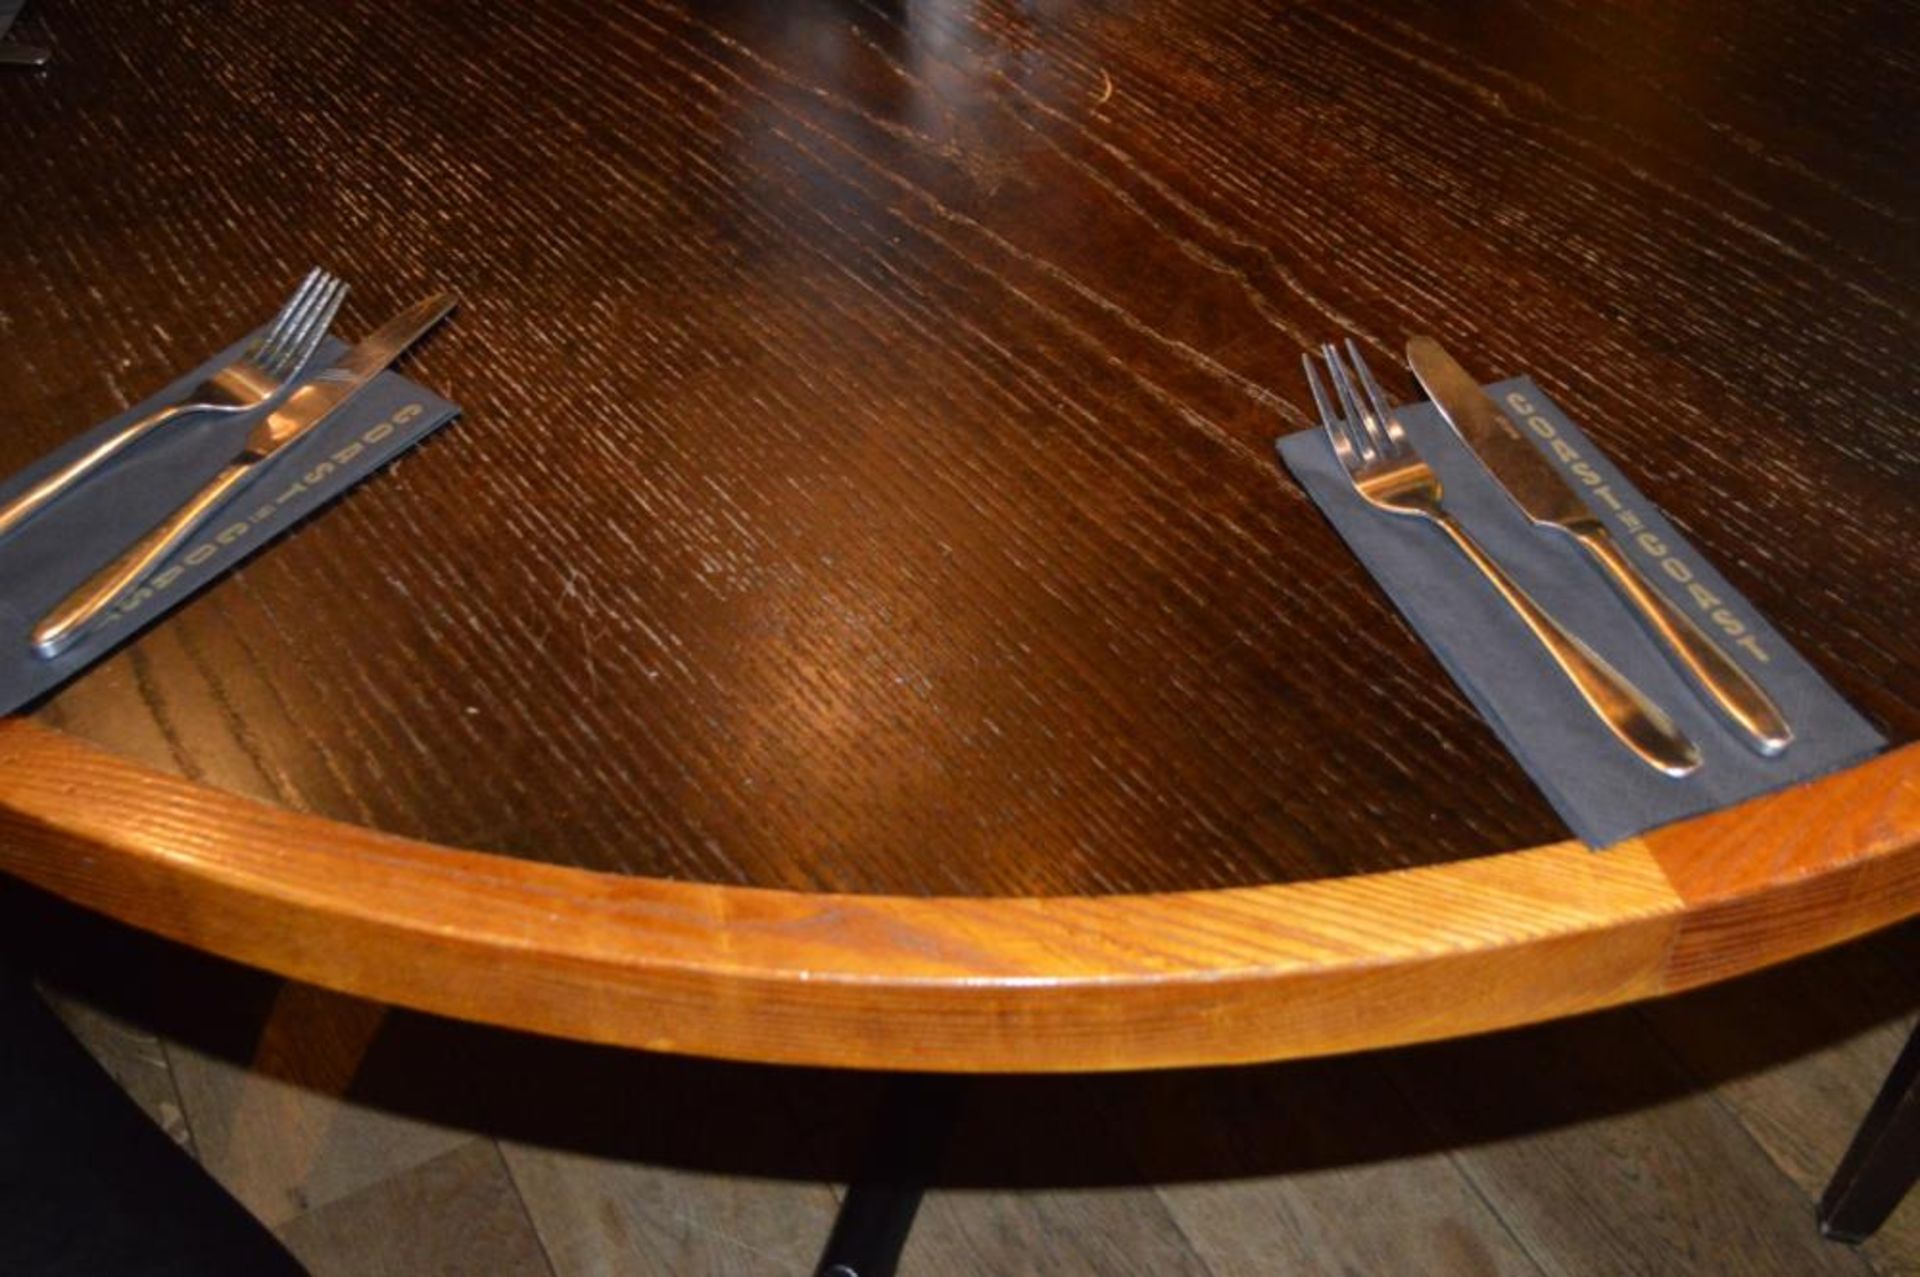 1 x Restaurant Dining Table With Cast Iron Base - Two Tone Wooden Finish With Shaped Edges - H76 x - Image 4 of 5